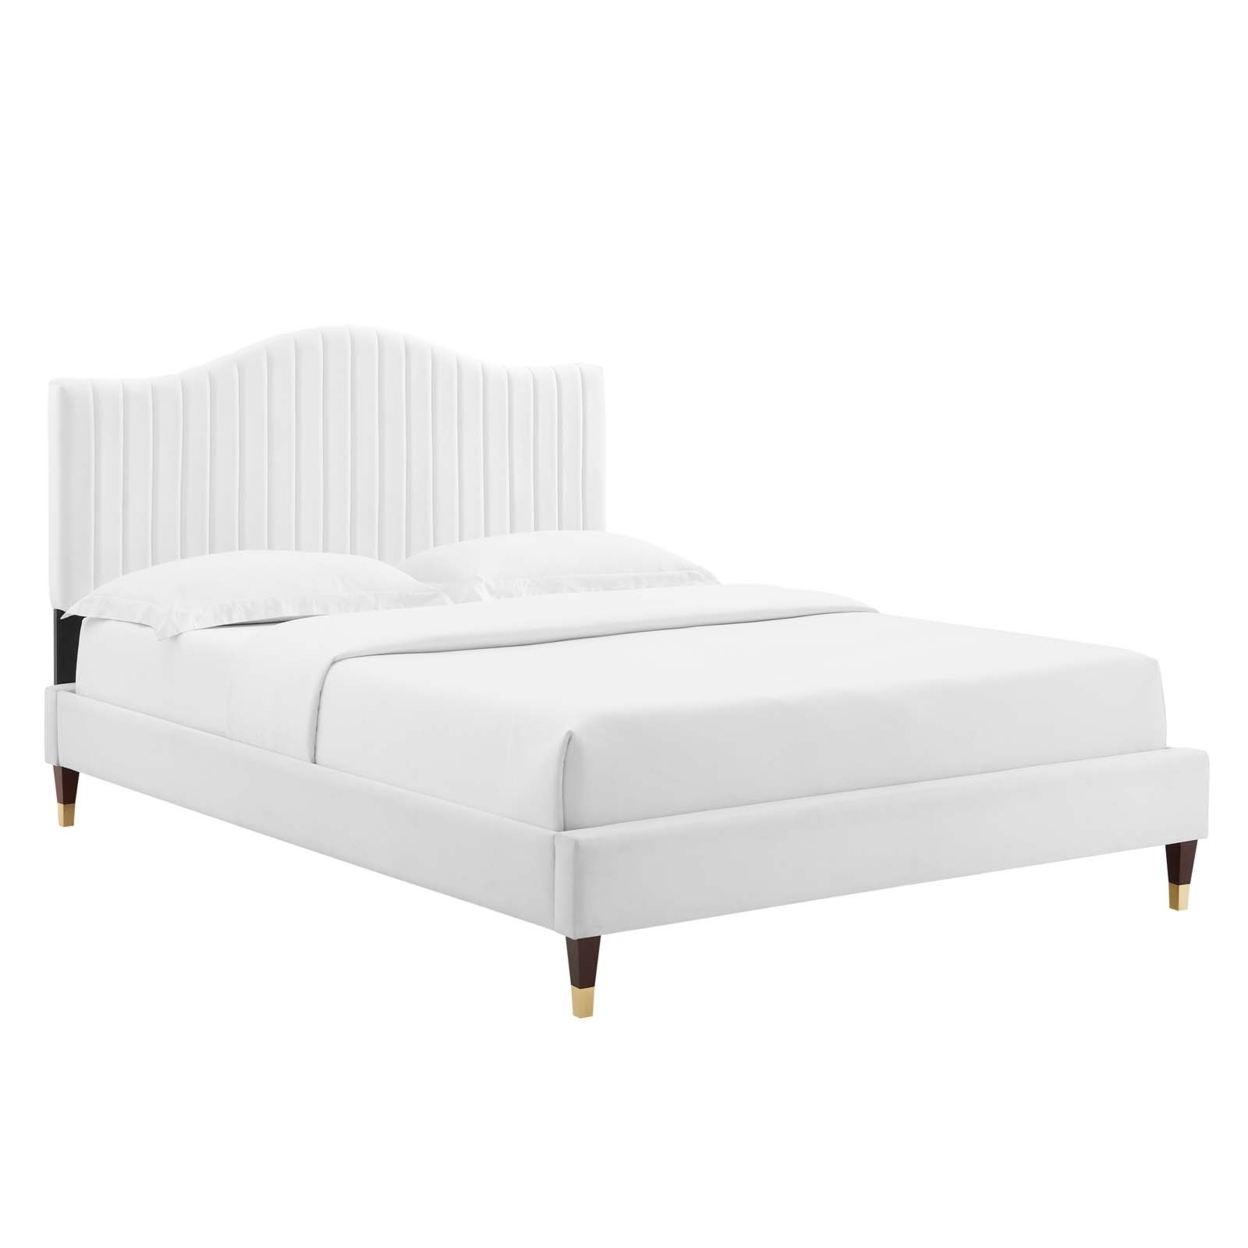 Queen Size Platform Bed, Classic White Velvet, Vertical Channel Tufting